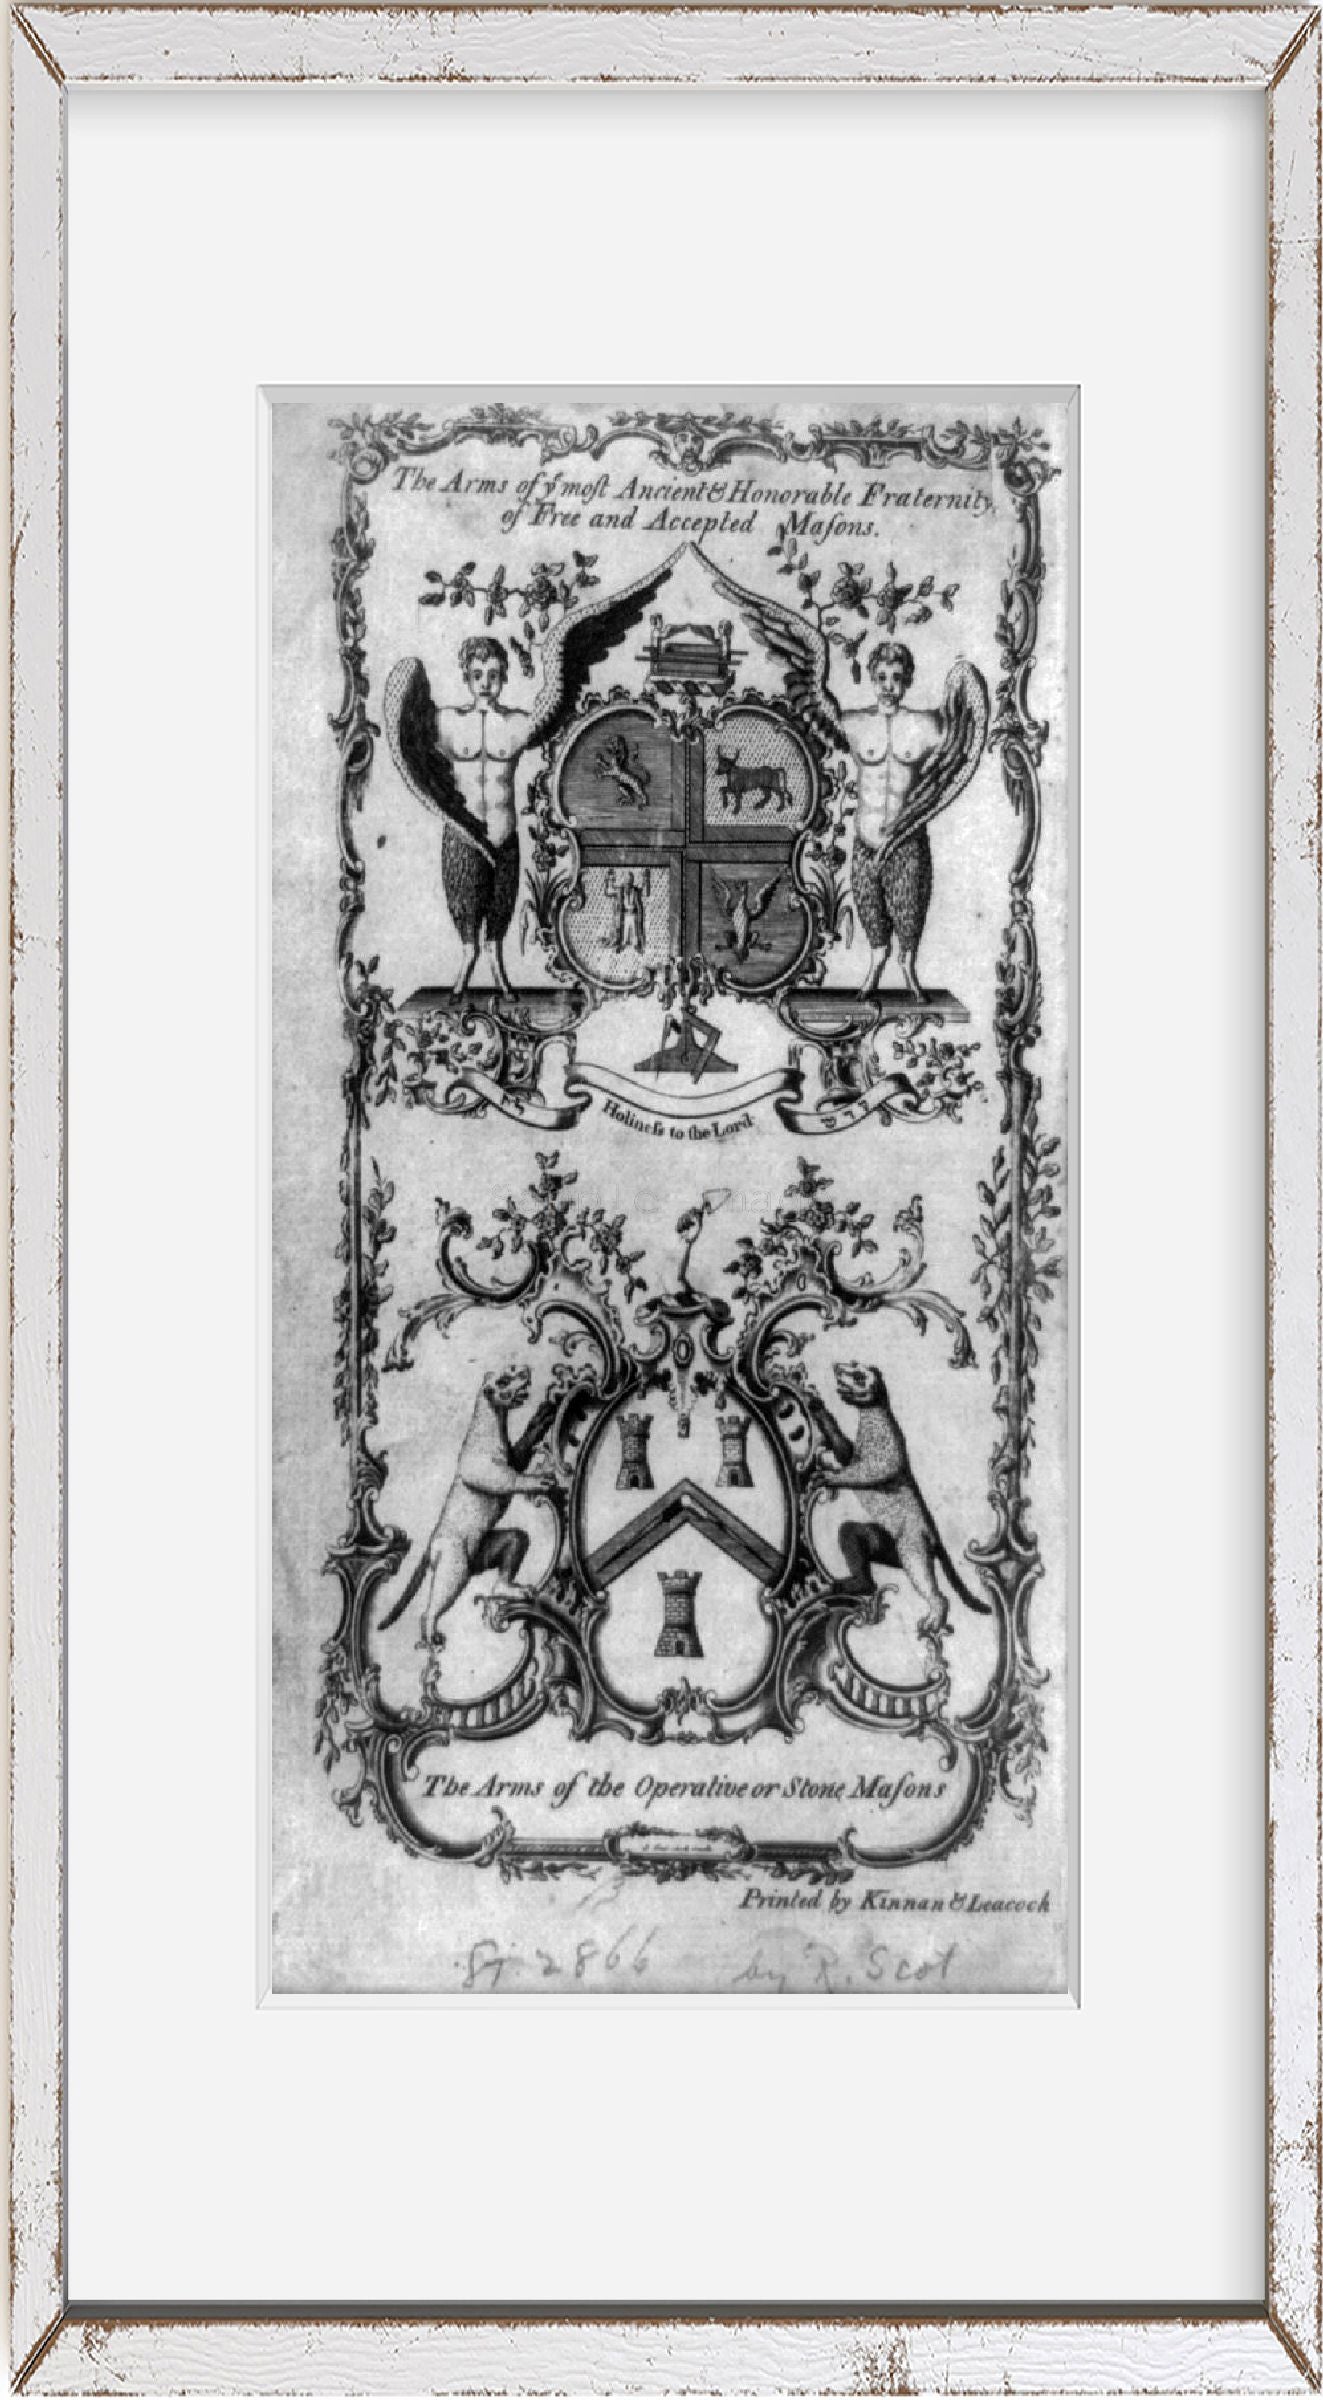 Photo: Arms of the most Ancient & Honorable Fraternity of Free & Accepted Masons